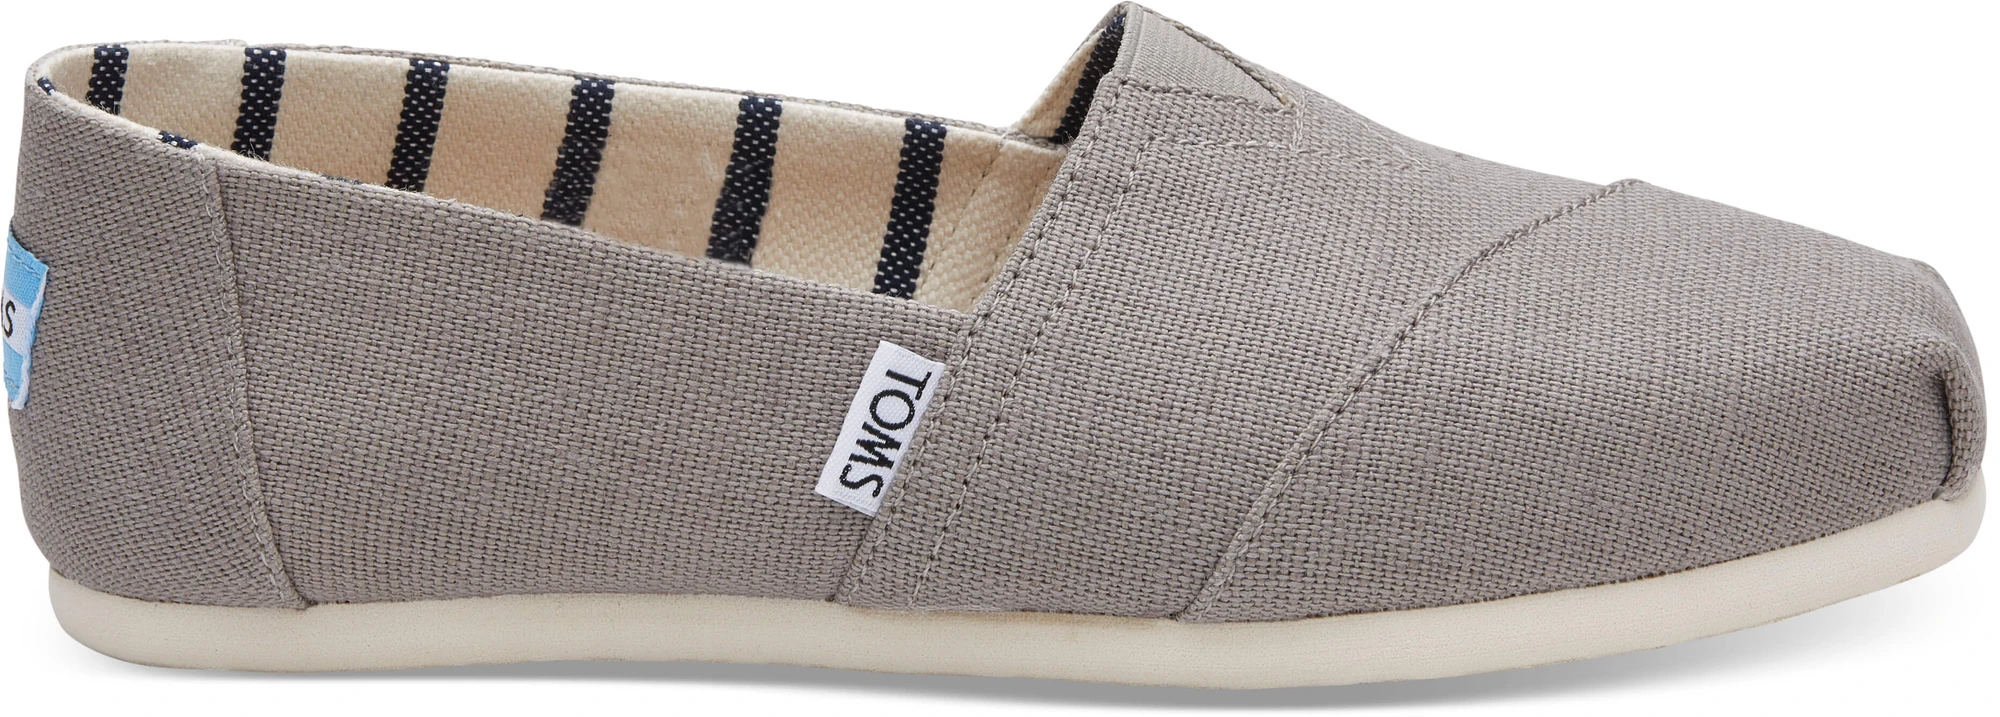 TOMS Womens Classic Canvas Slip-On Shoe - Morning Dove Heritage Canvas - 9